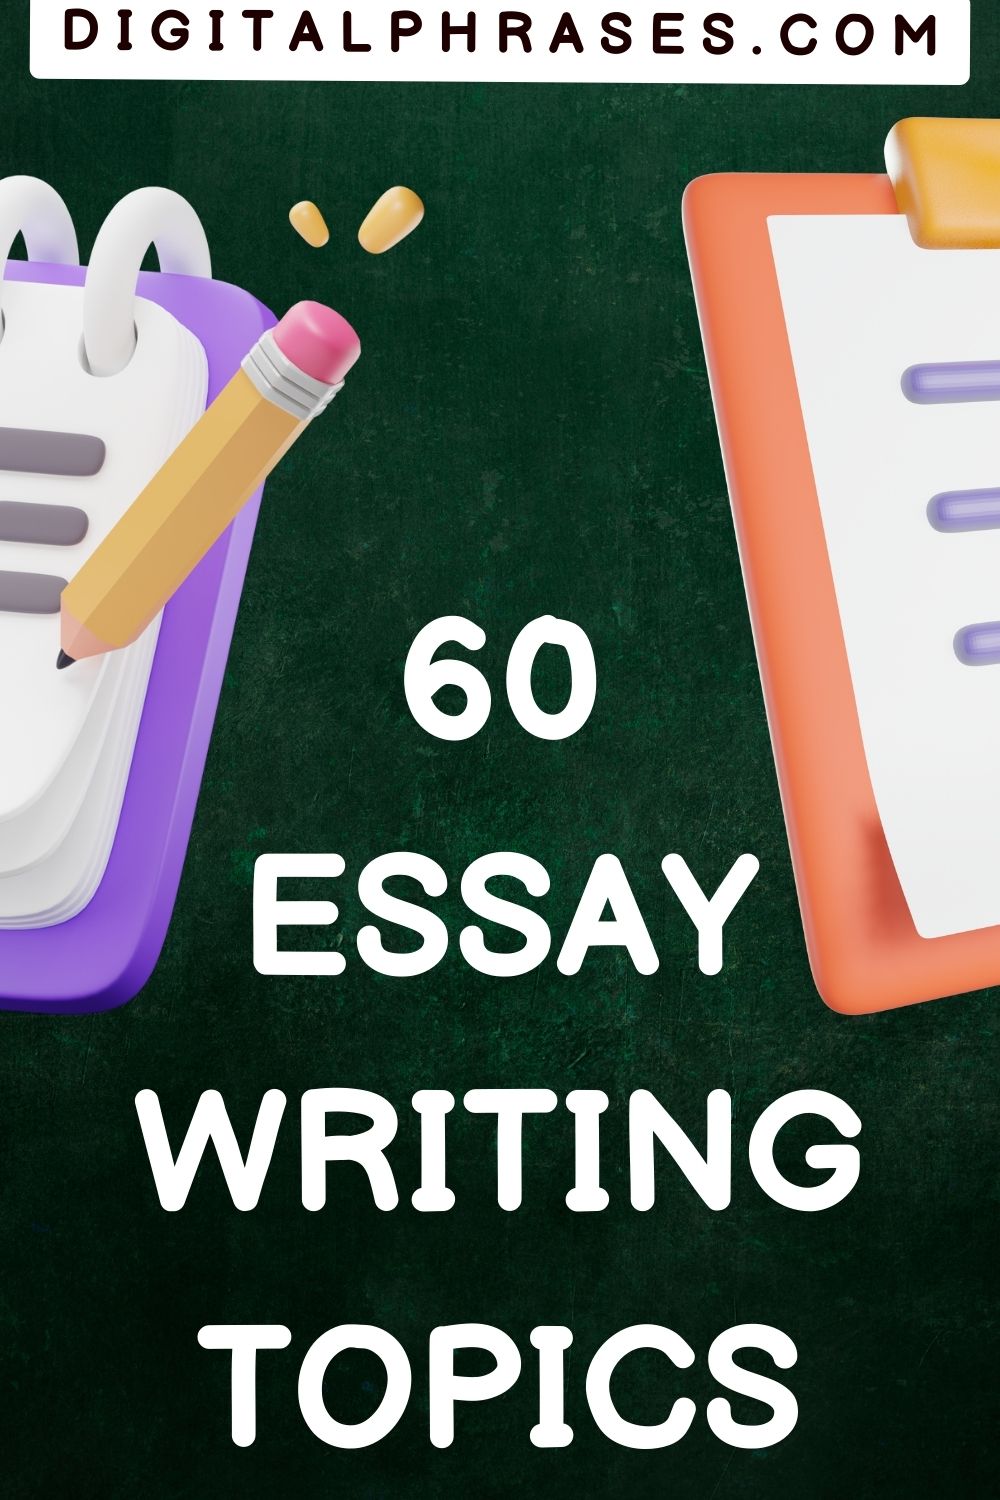 green background image with text - 60 Essay Writing Topics